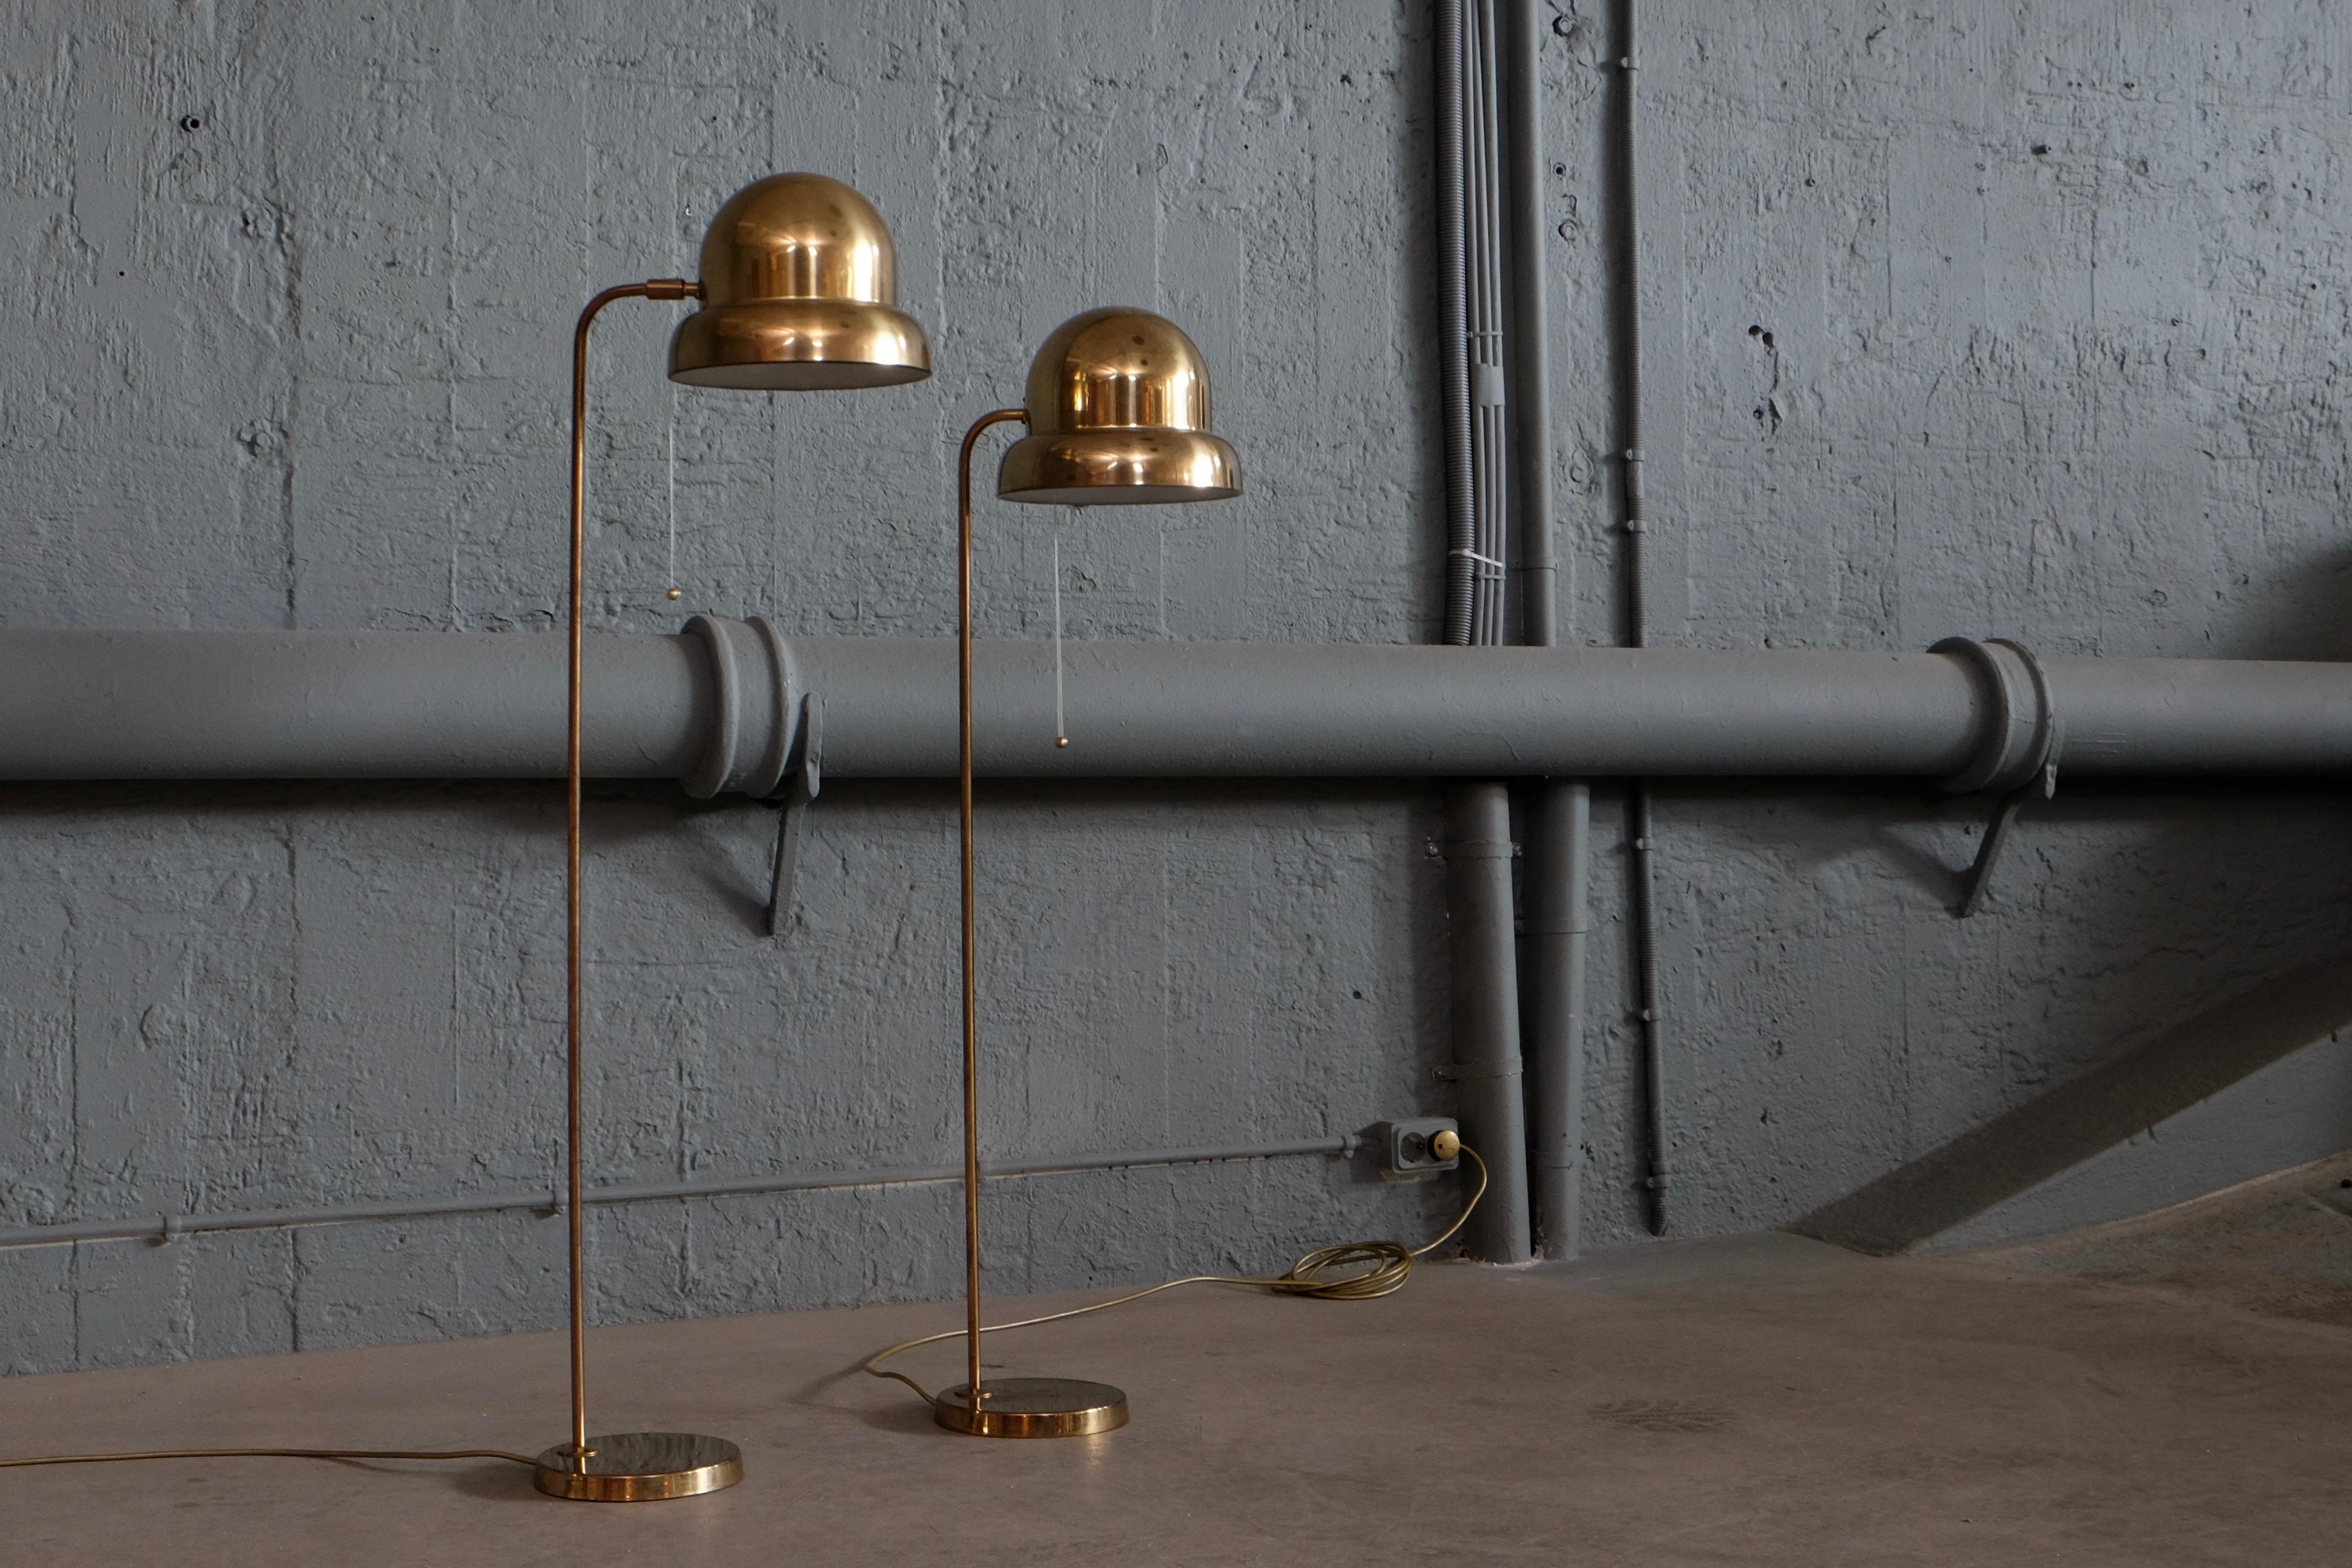 Set of two floor lamps in brass, model G-090 manufactured by Bergboms, Sweden, 1960s.
New wiring.
Please note: Height differs 10 cm, 108 cm vs. 118 cm.